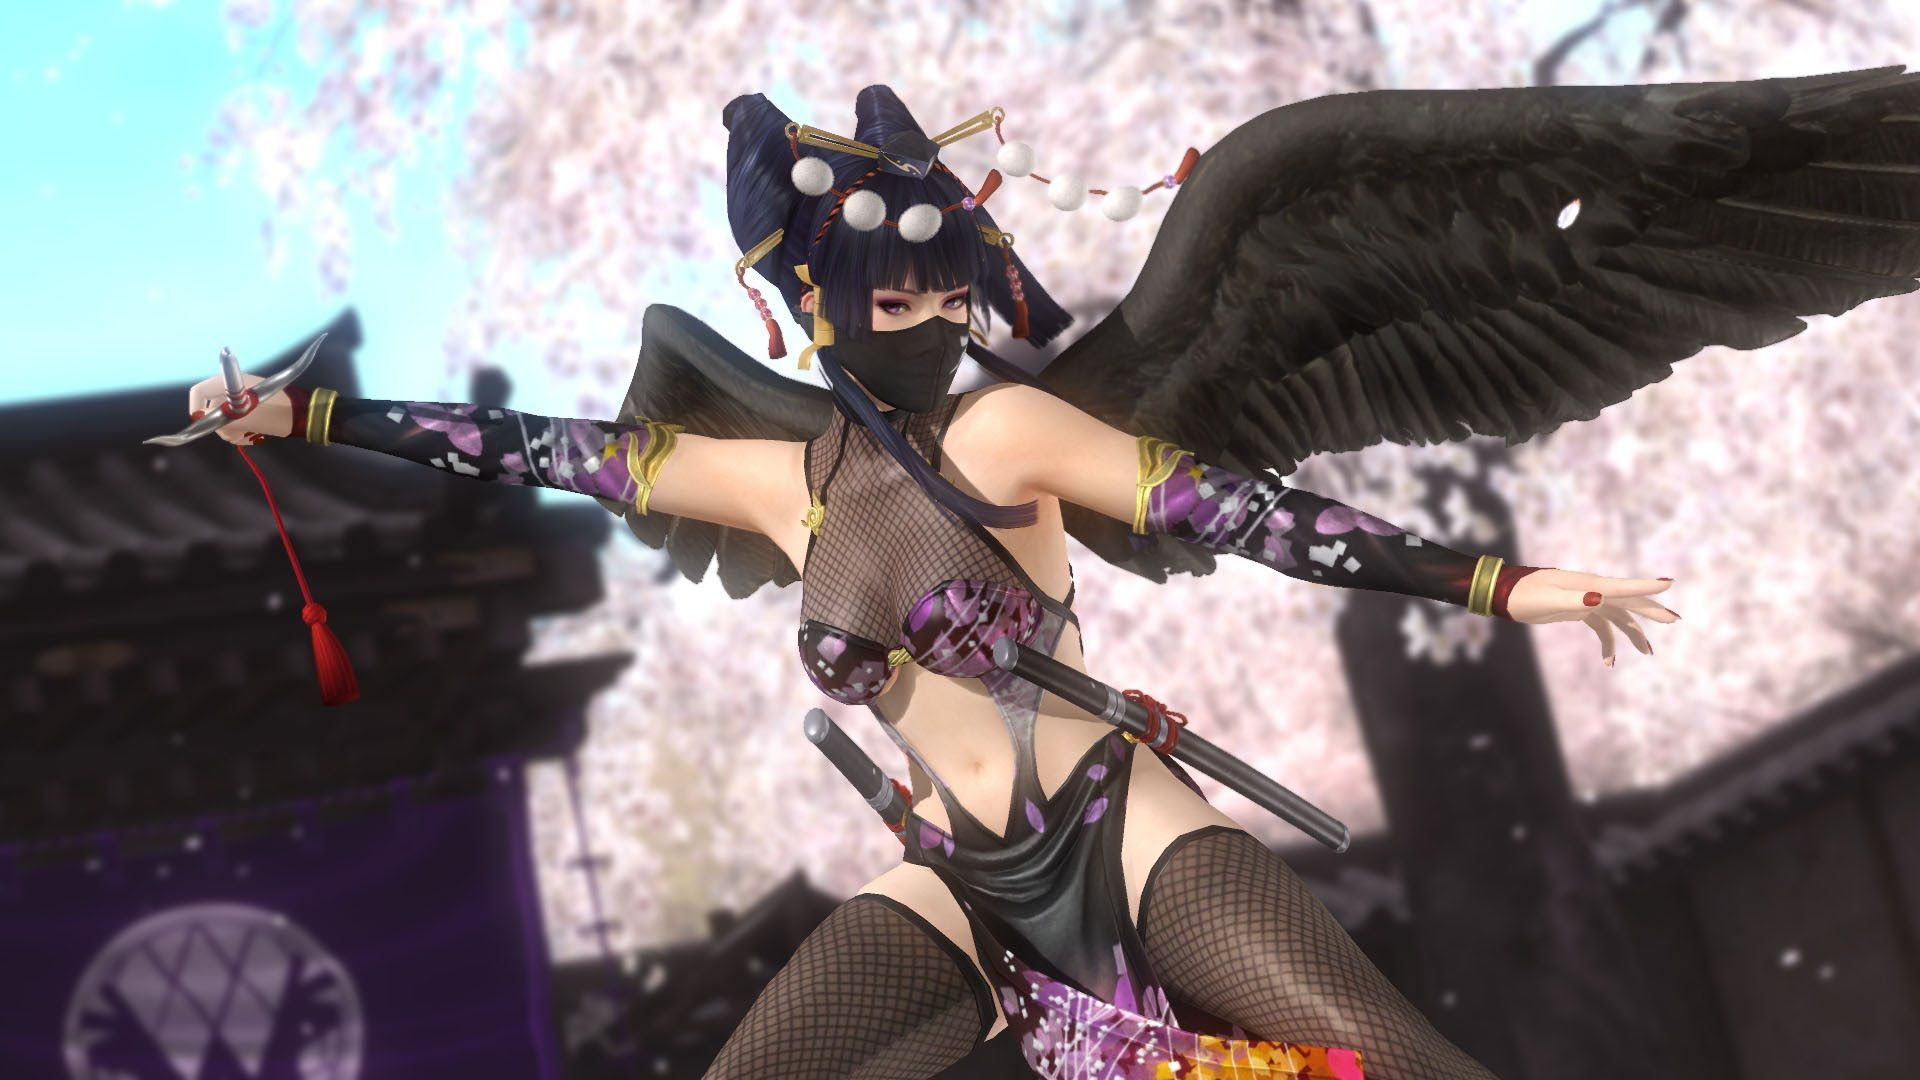 Dead Or Alive 5 Last Round S New Ninja Costumes Show All The Skin You Would Expect